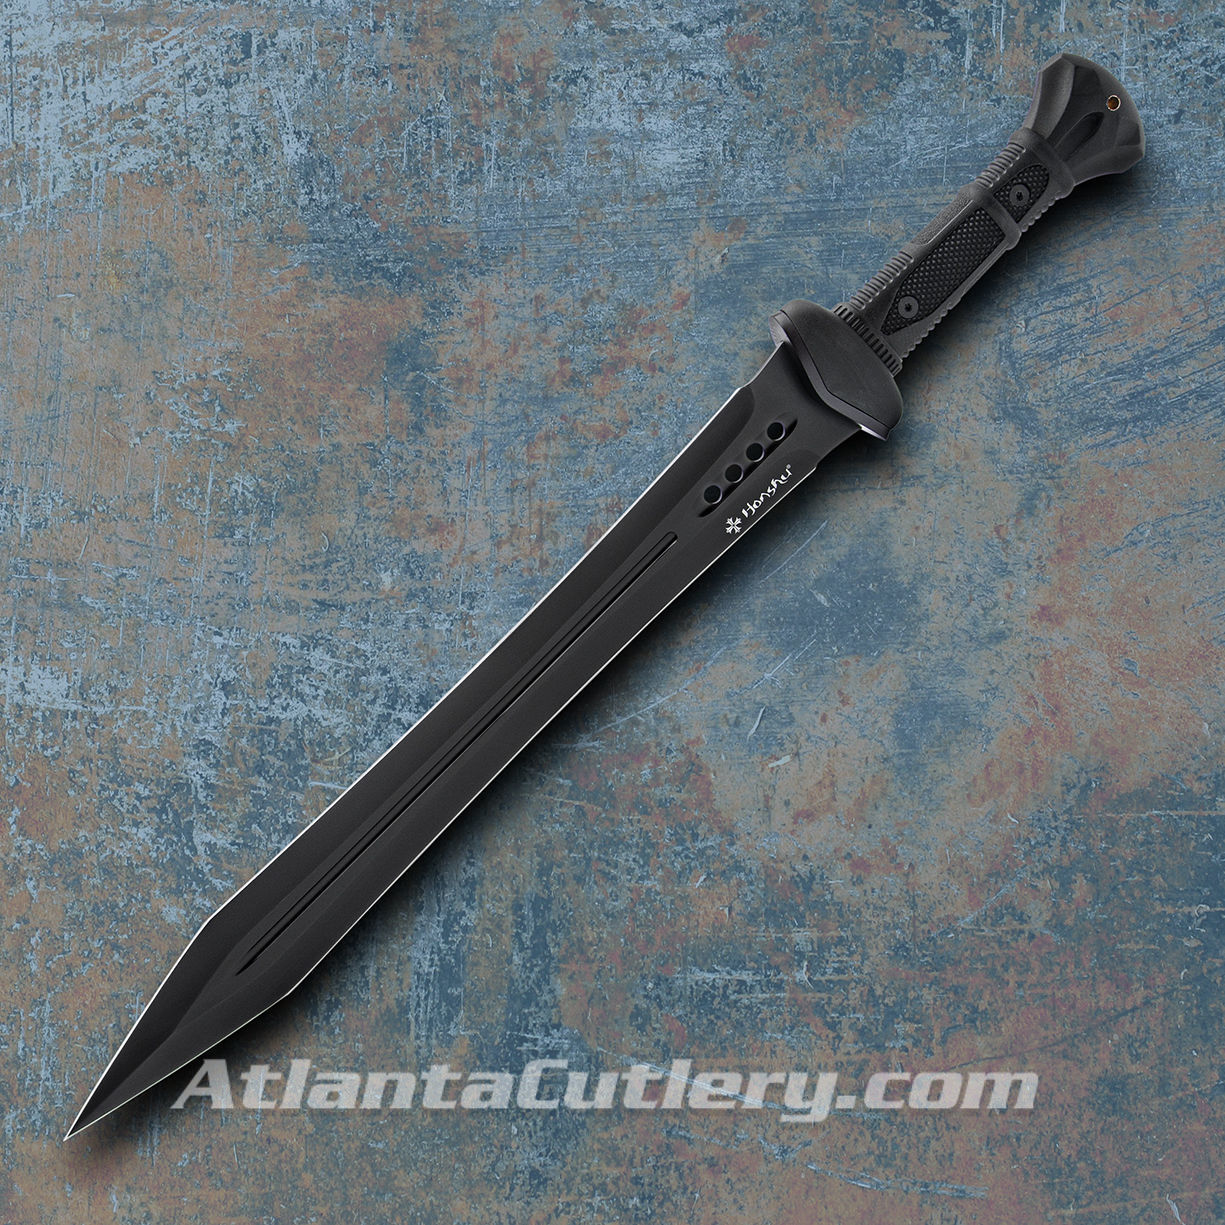 Honshu Midnight Forge Gladiator Sword with full tang black stainless steel blade, textured slip free grip and leather sheath 